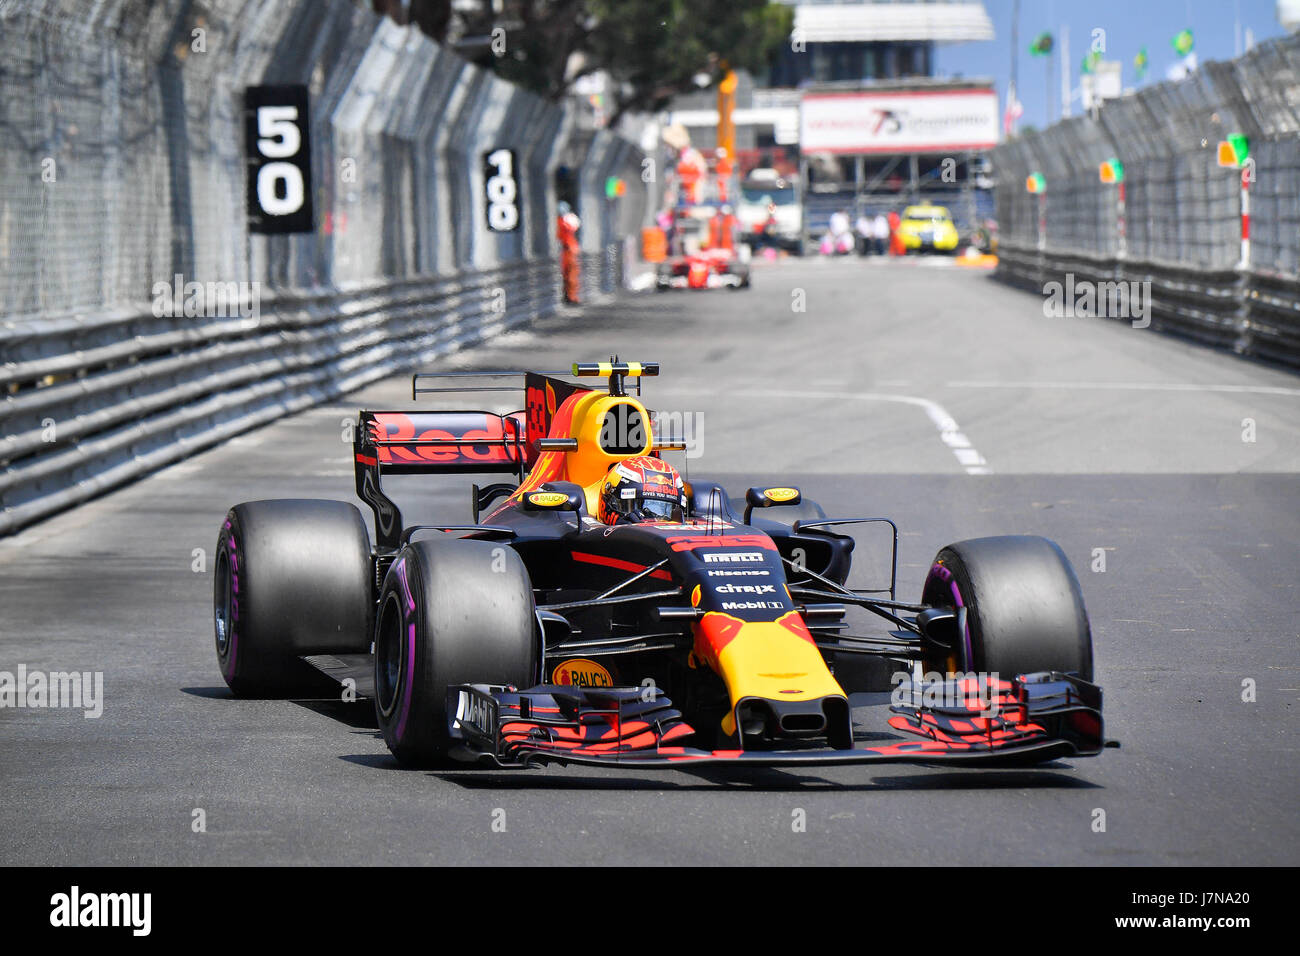 Monaco. 25th May, 2017. Red Bull Racing Tag Heuer Belgian-Dutch driver Max  Verstappen competes during the second practice session of the Formula One  Monaco Grand Prix in Monaco, on May 25, 2017.